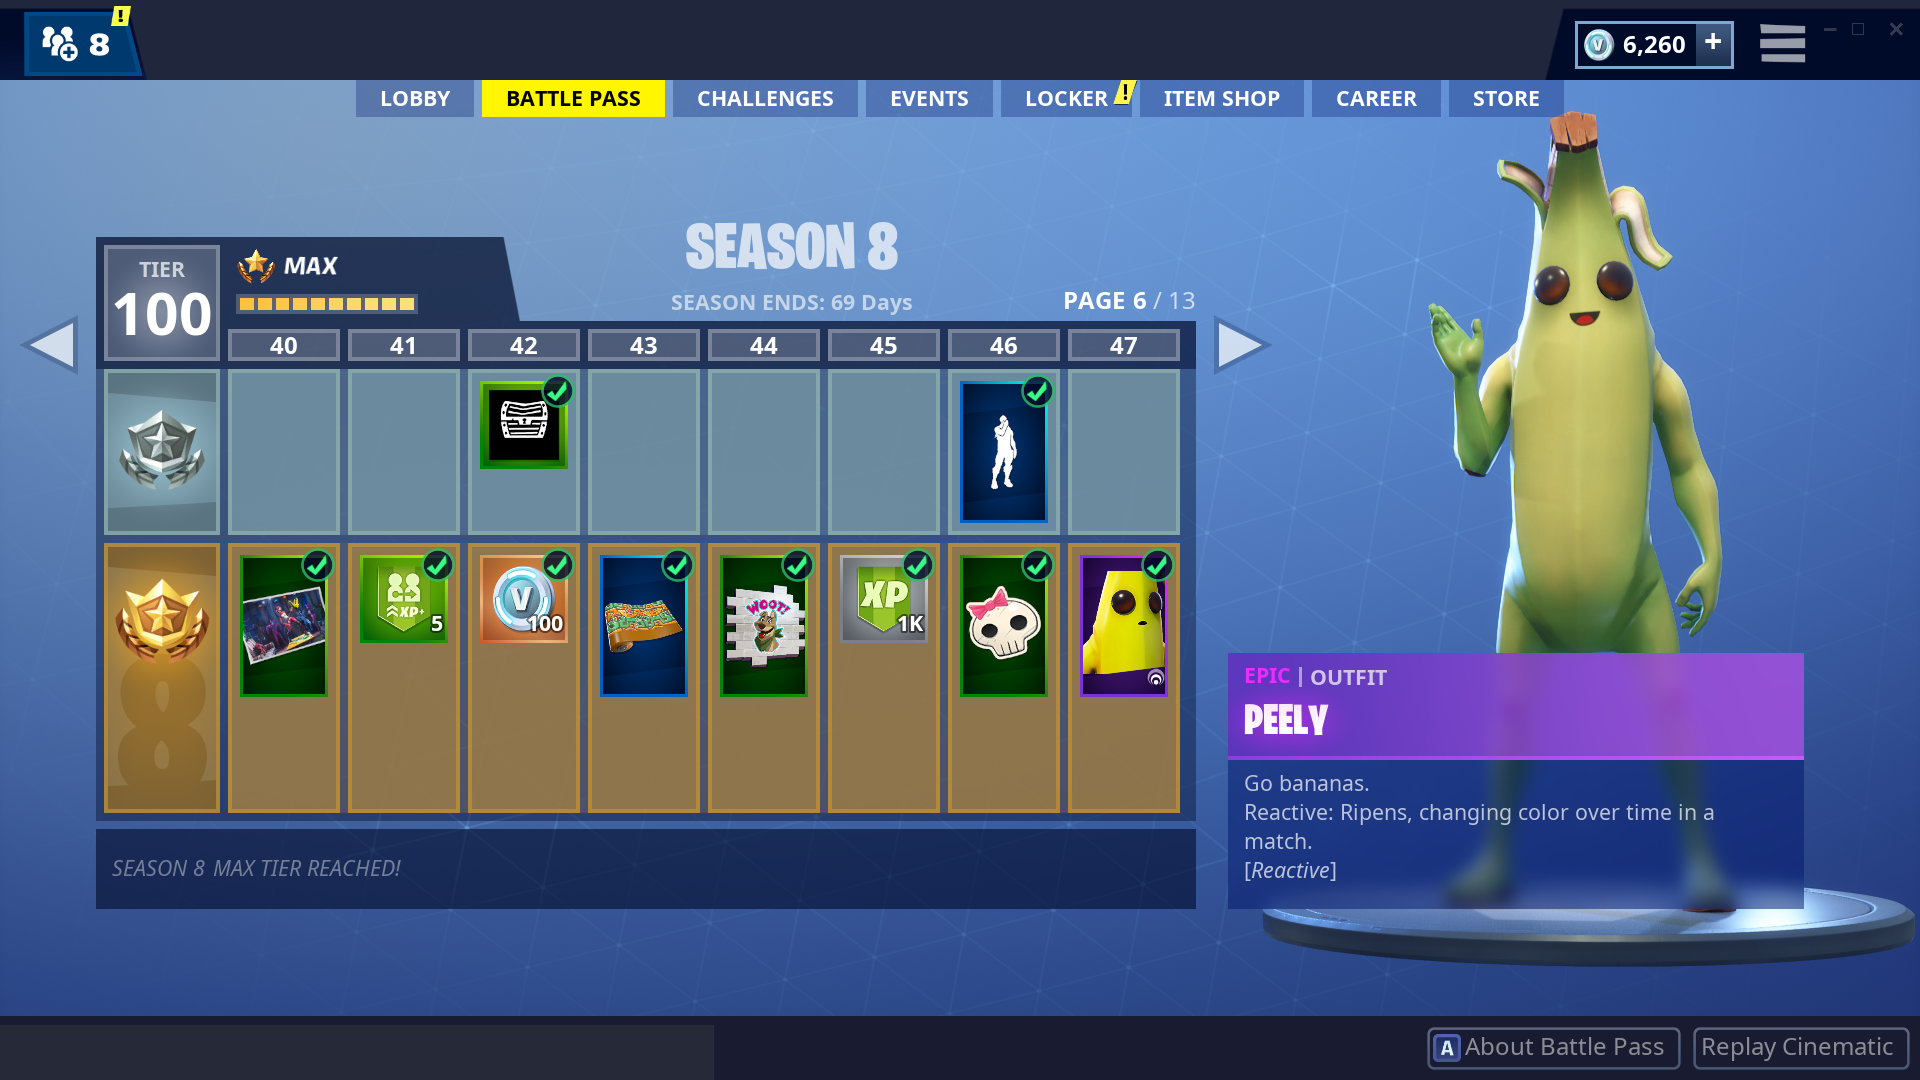 Fortnite Season 8 - All Battle Pass Tiers and Rewards ... - 1920 x 1080 png 1365kB